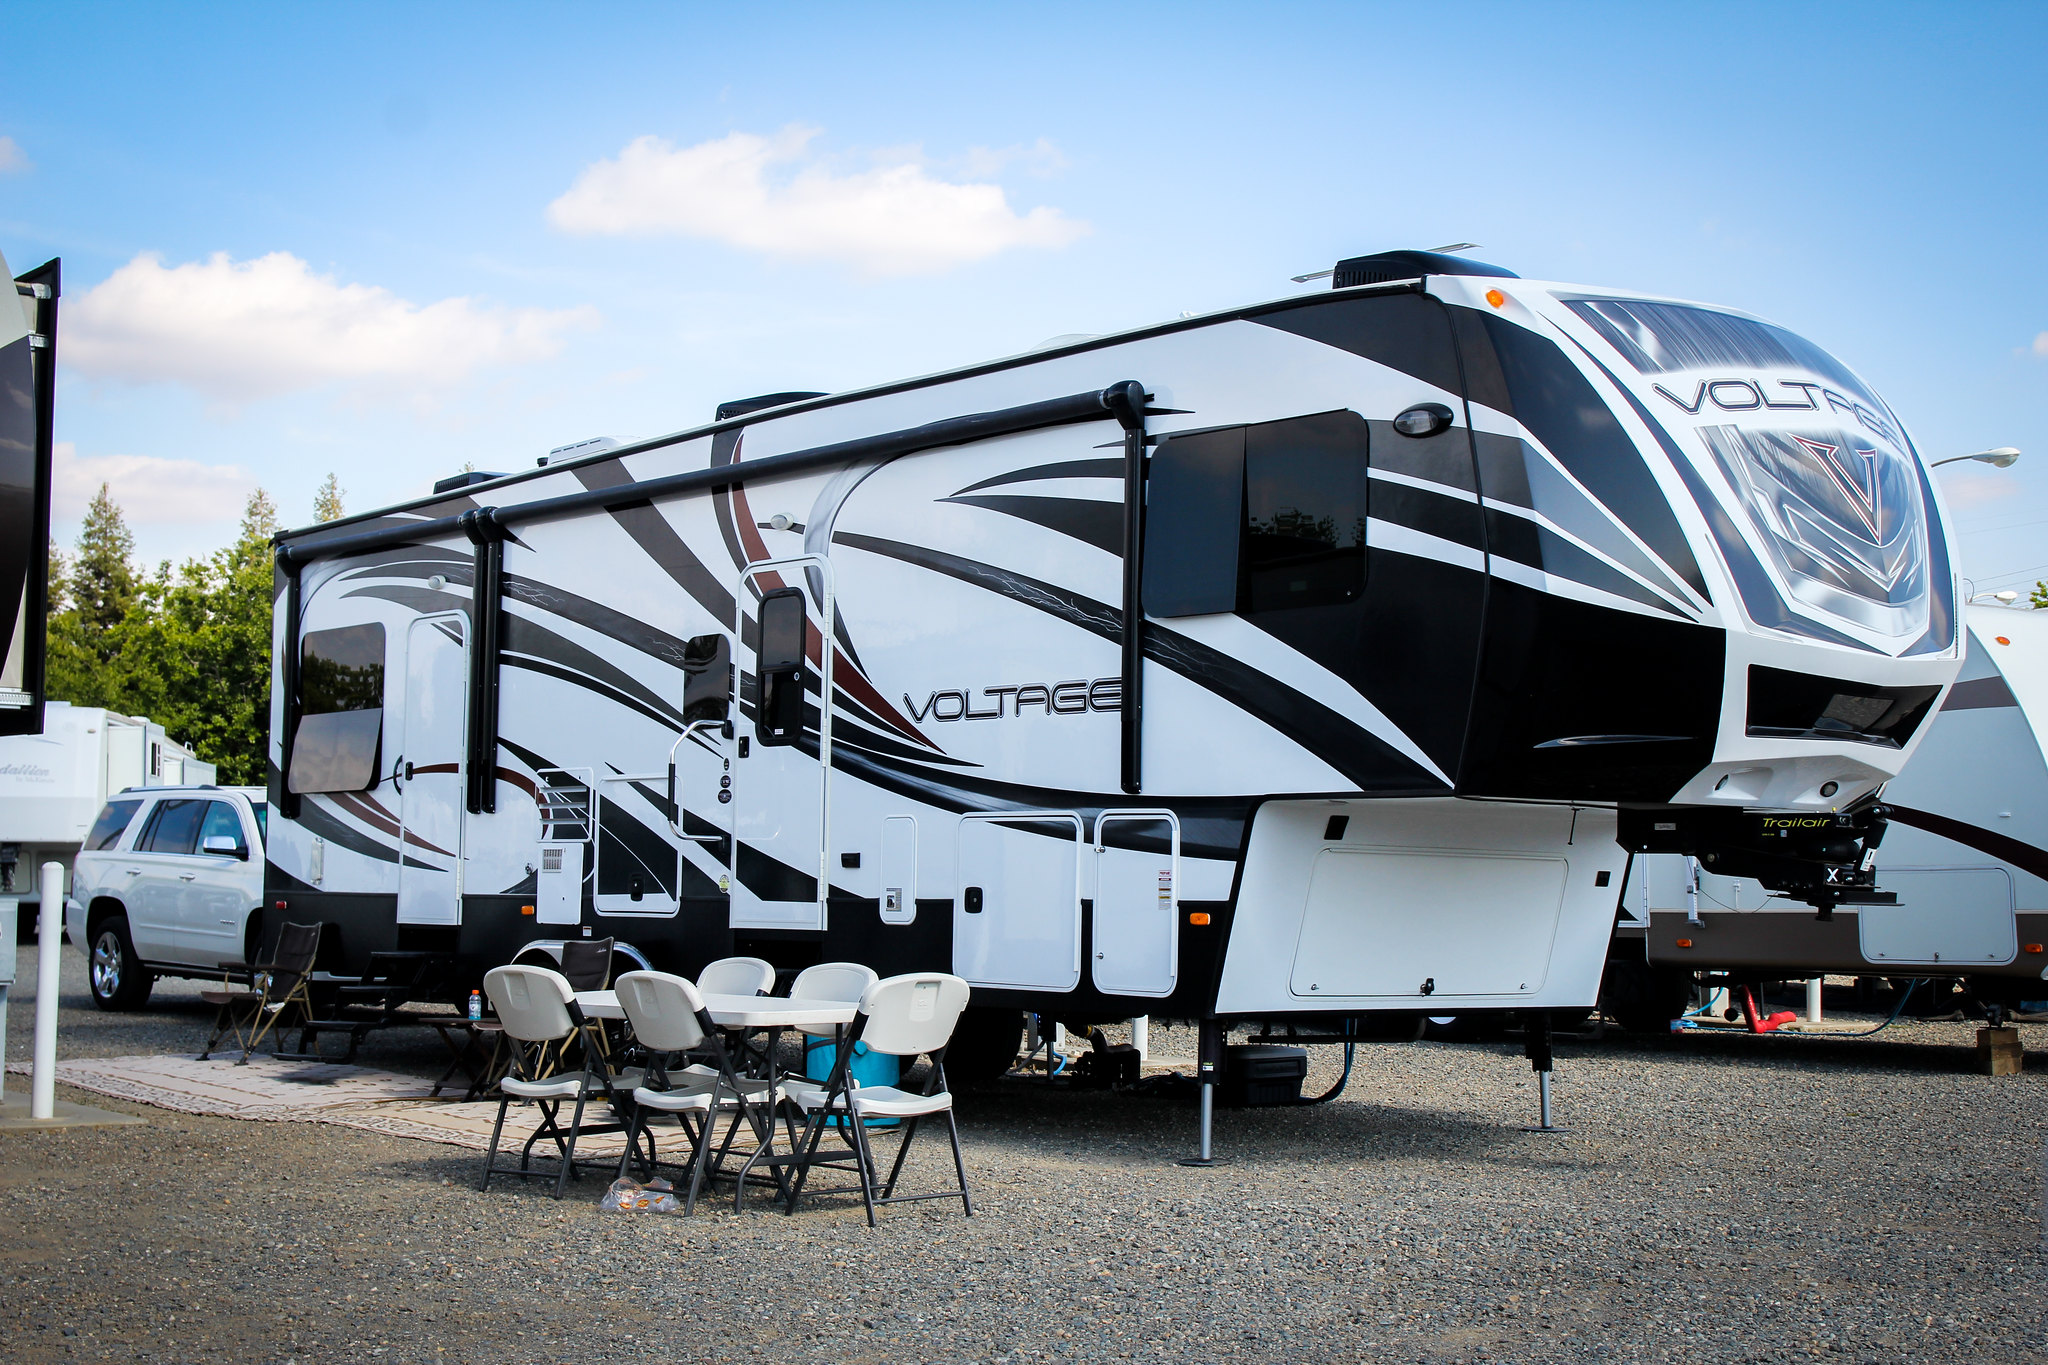 RV parked at Cal Expo RV Park